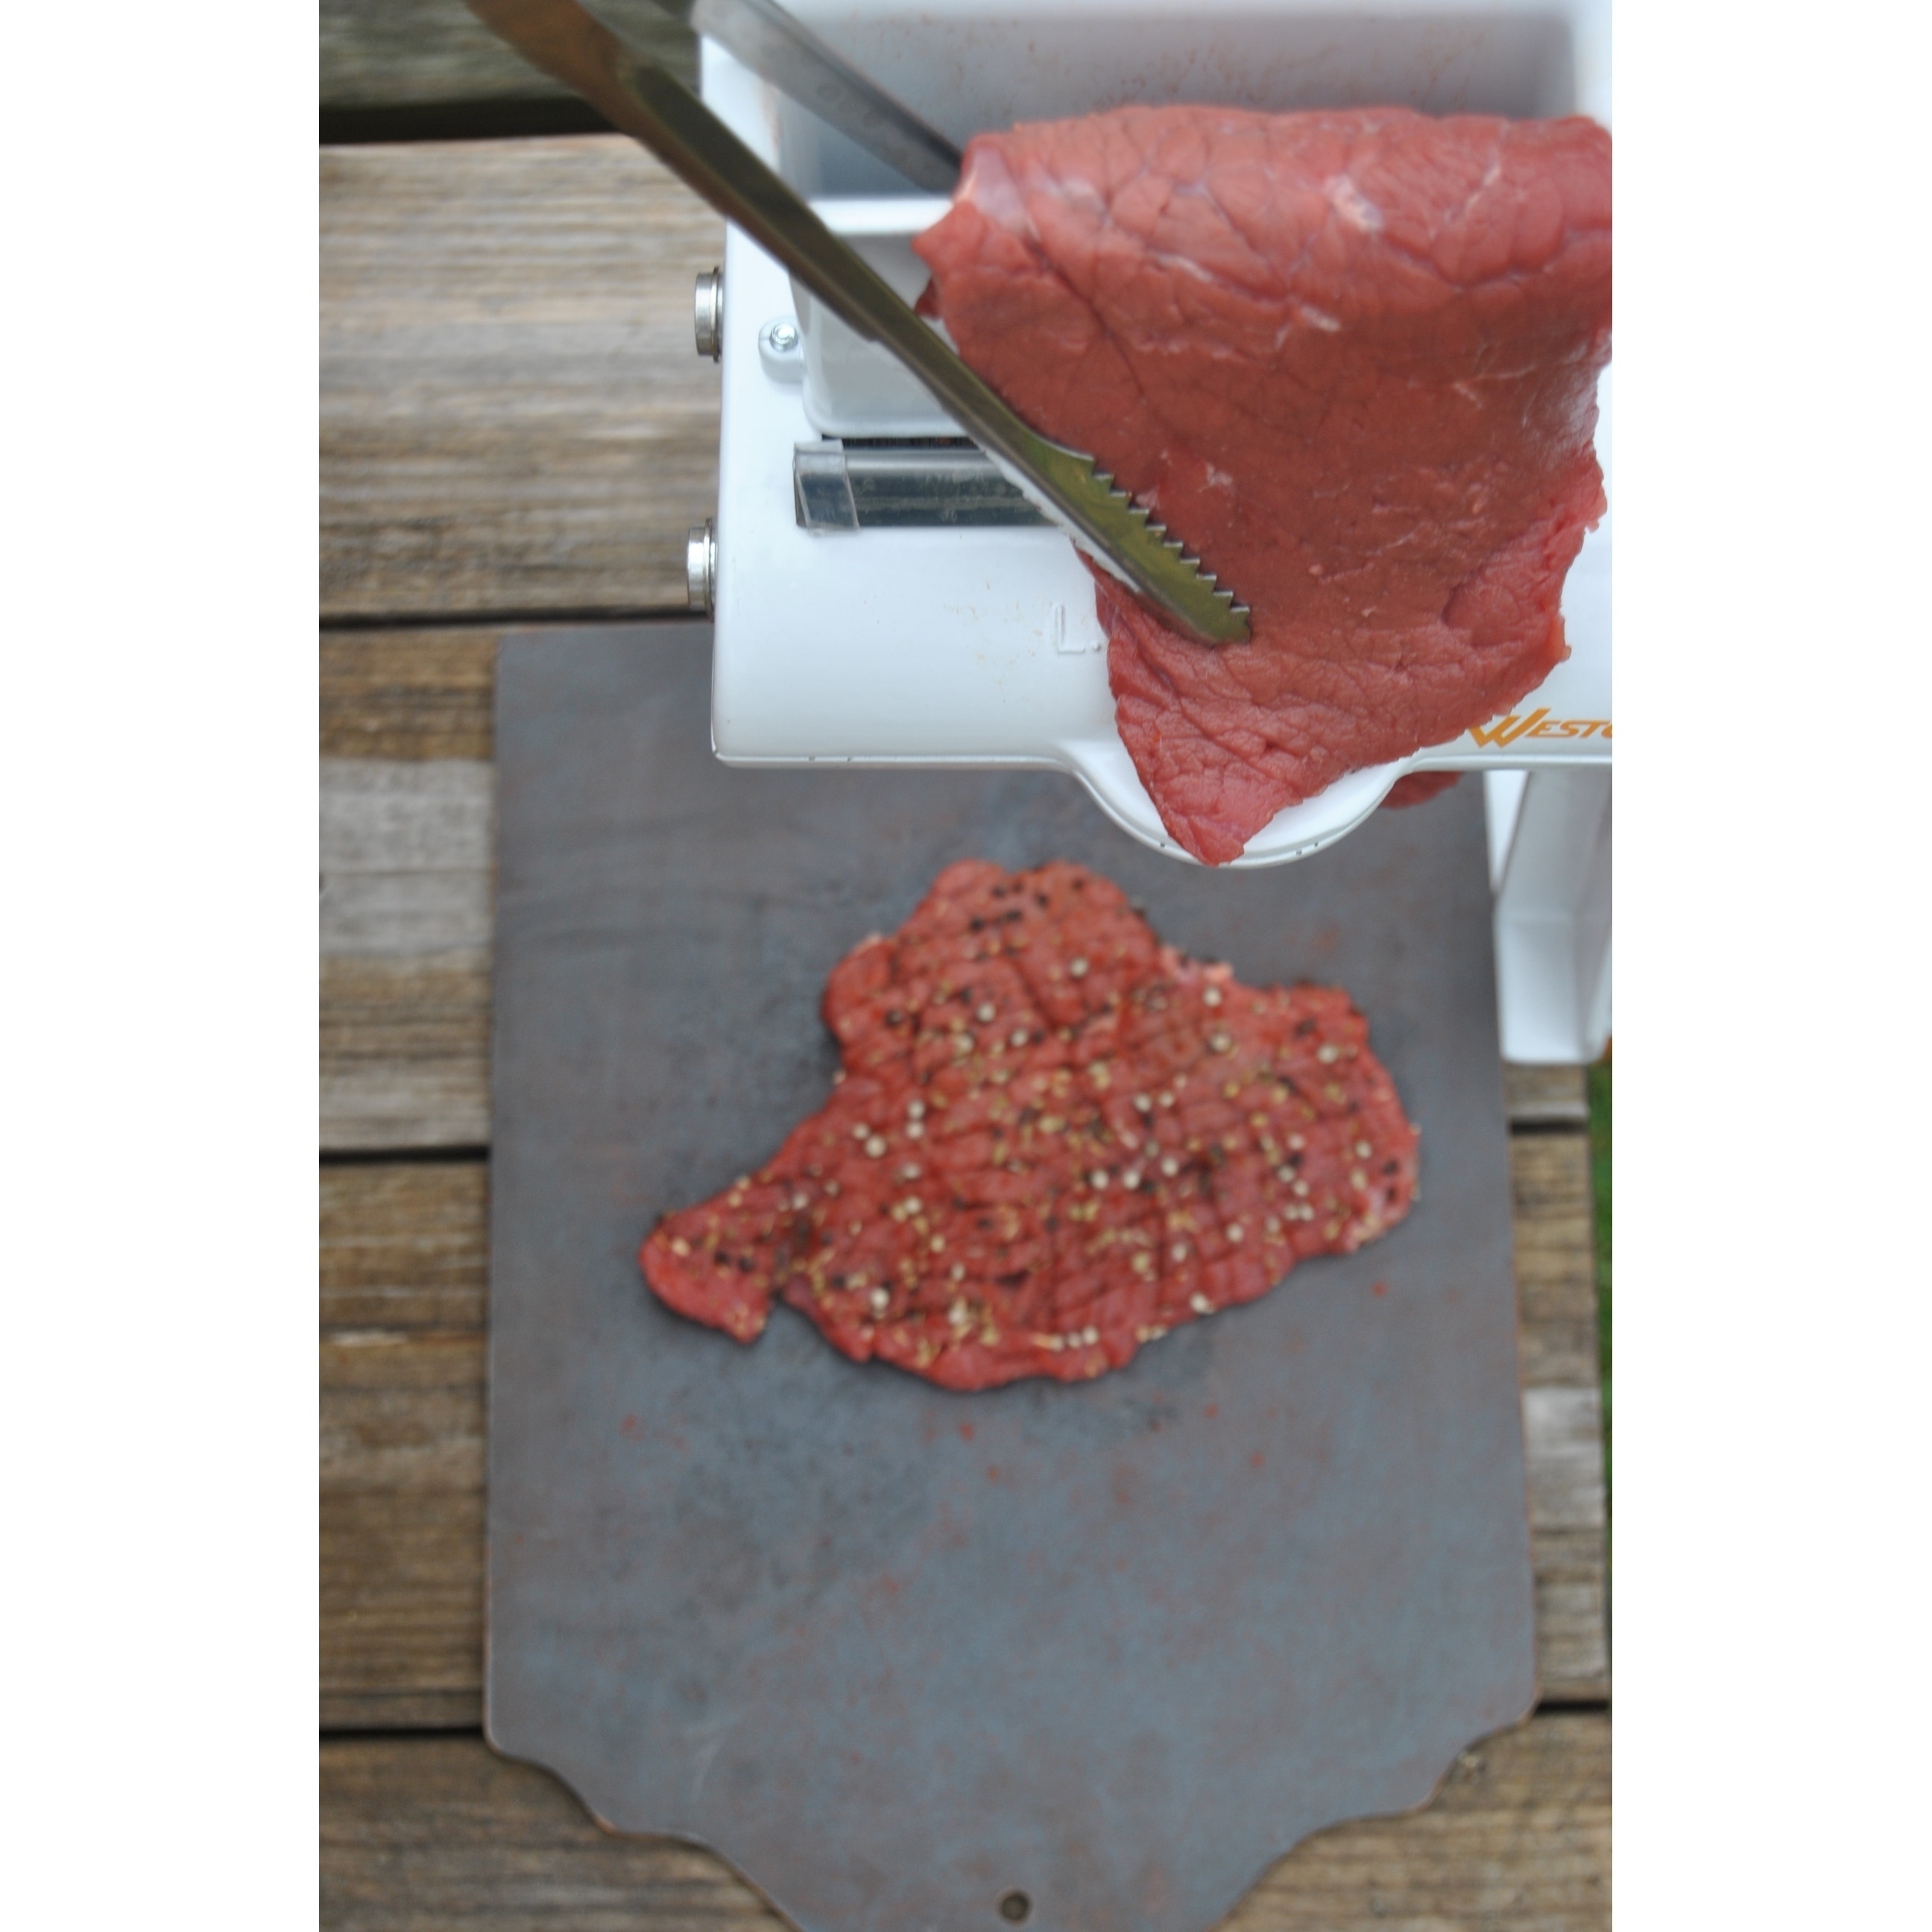 https://ak1.ostkcdn.com/images/products/21685532/Realtree-Manual-Meat-Tenderizer-Jerky-Slicer-5f5309c0-4756-4806-96c9-69165256ad3e.jpg